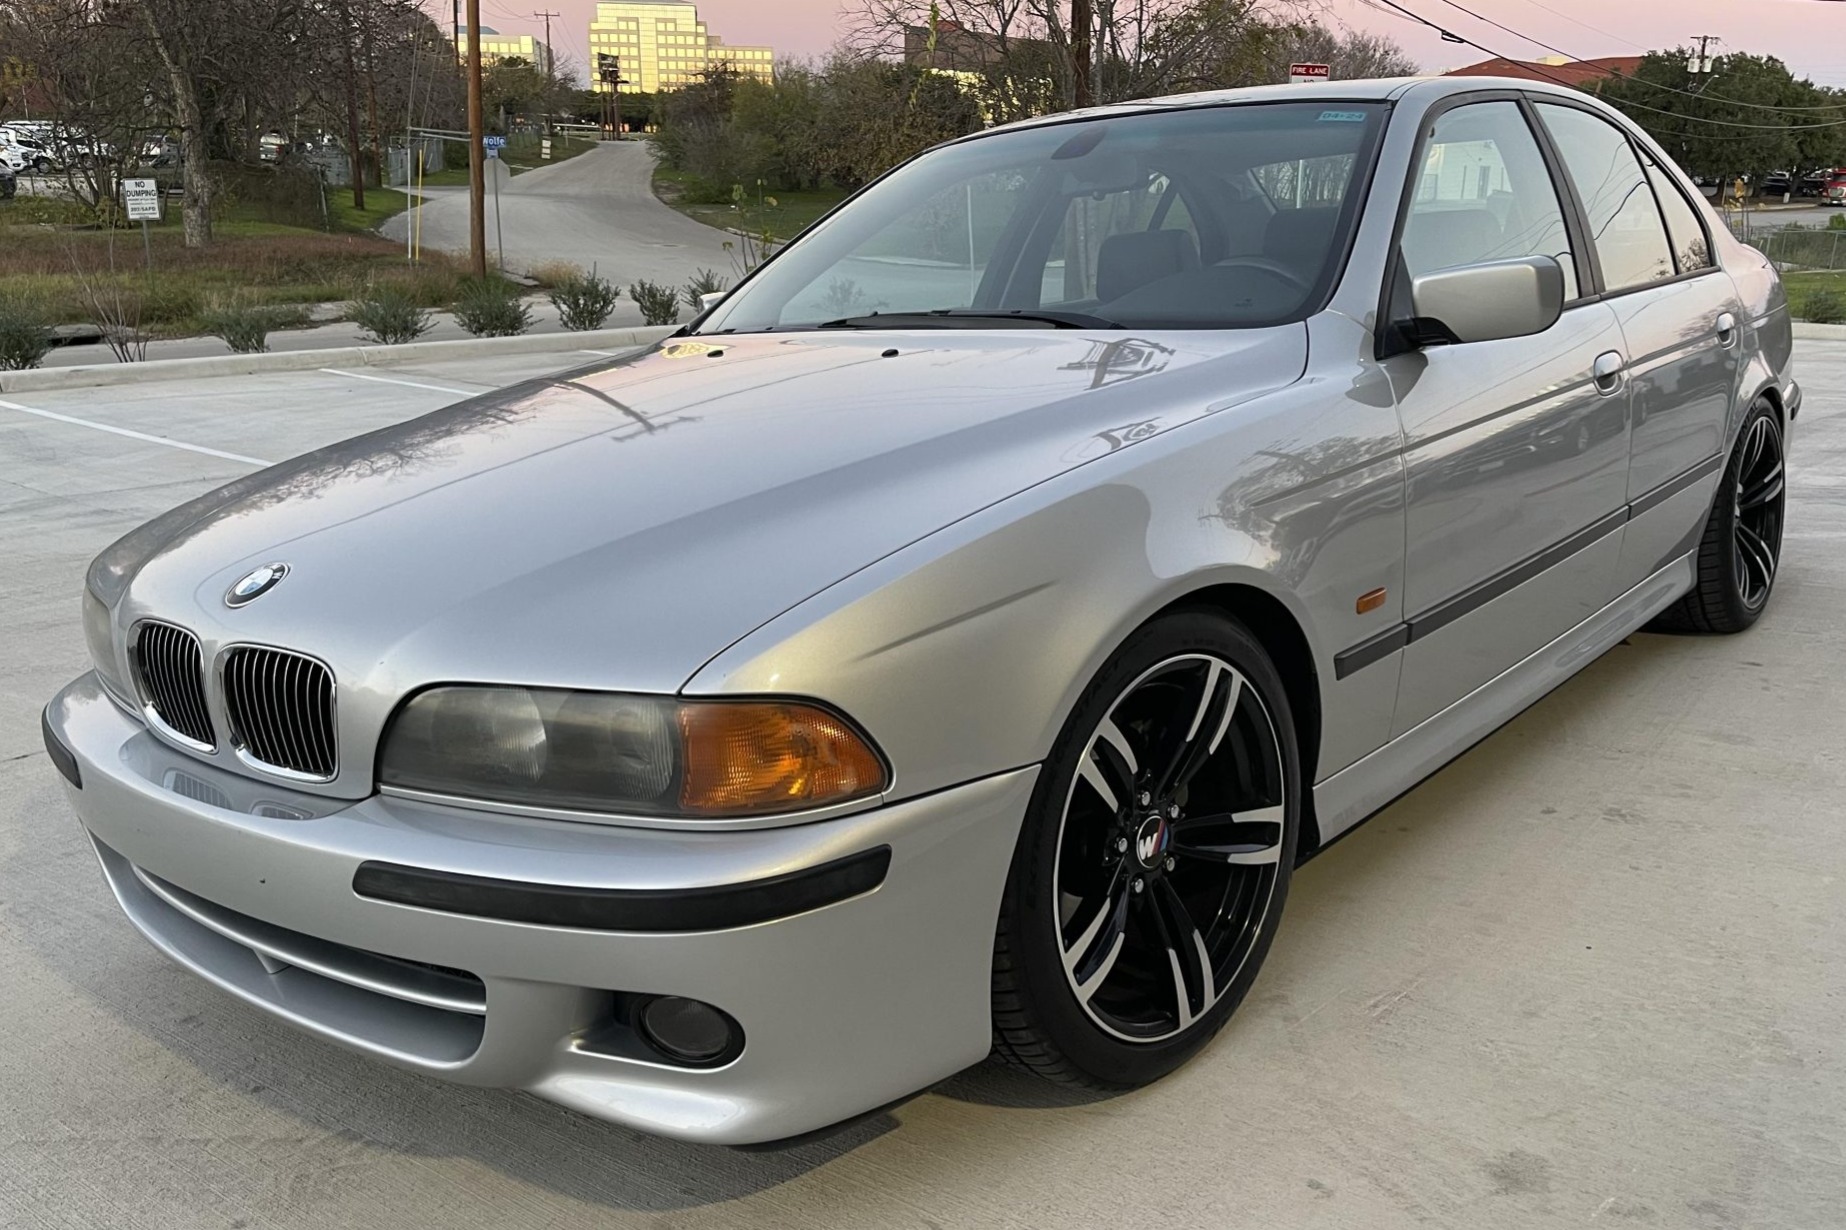 Used Supercharged 2000 BMW 540i Sport Review